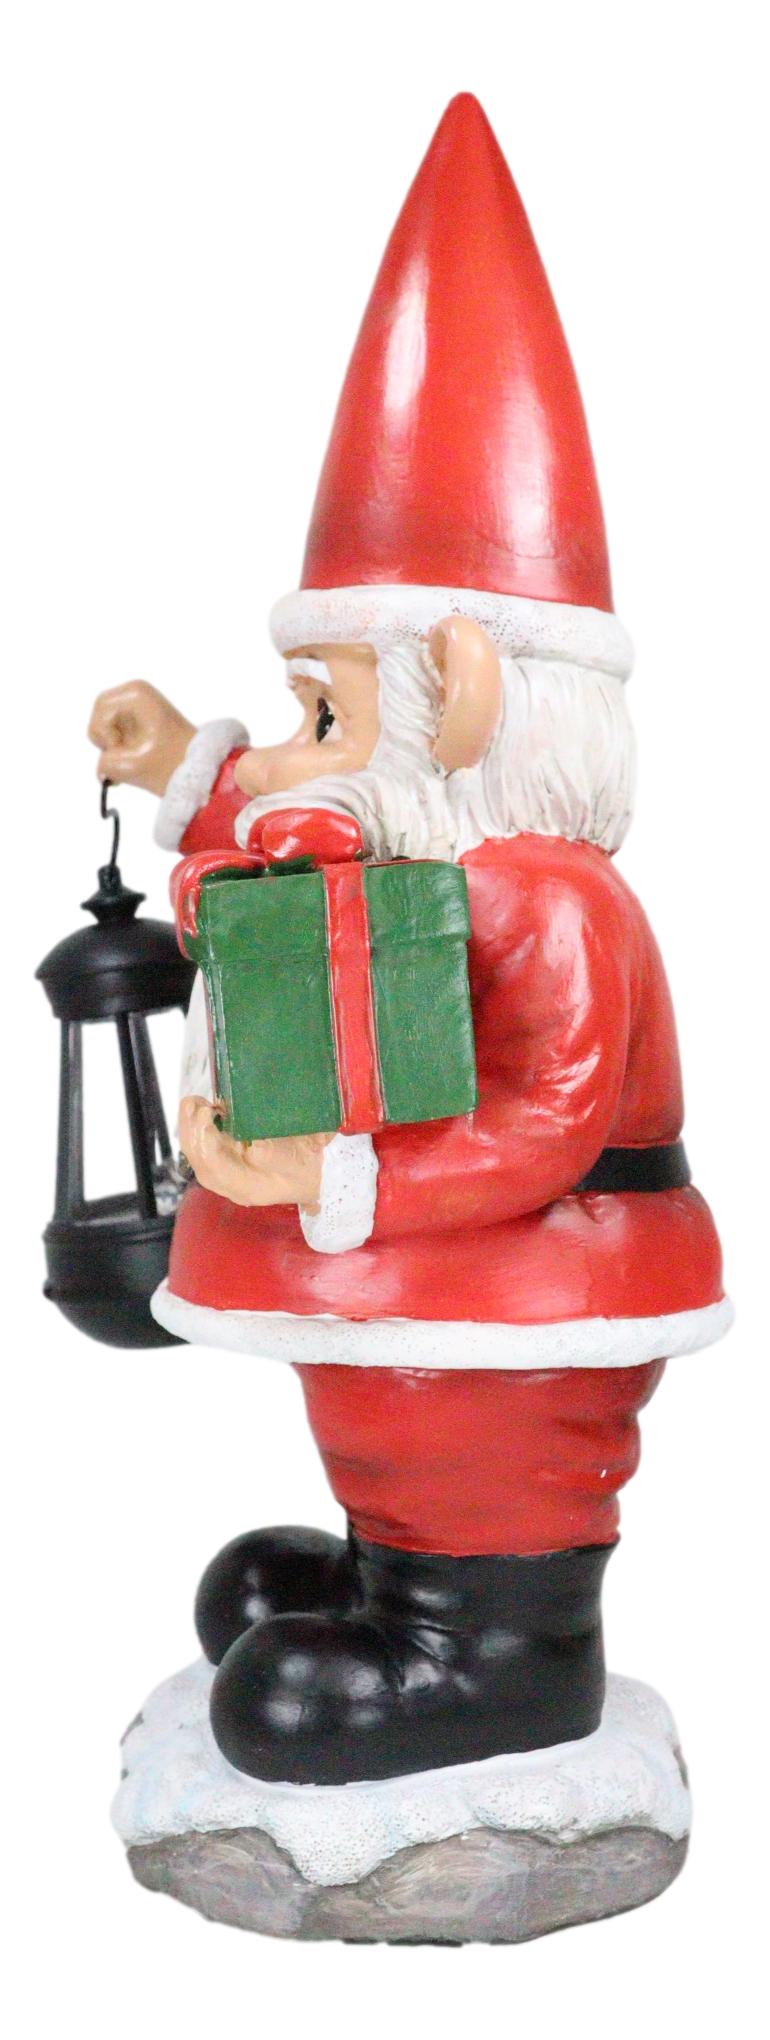 Merry Christmas Santa Claus Holding Gift And Solar Colorful LED Lantern Statue